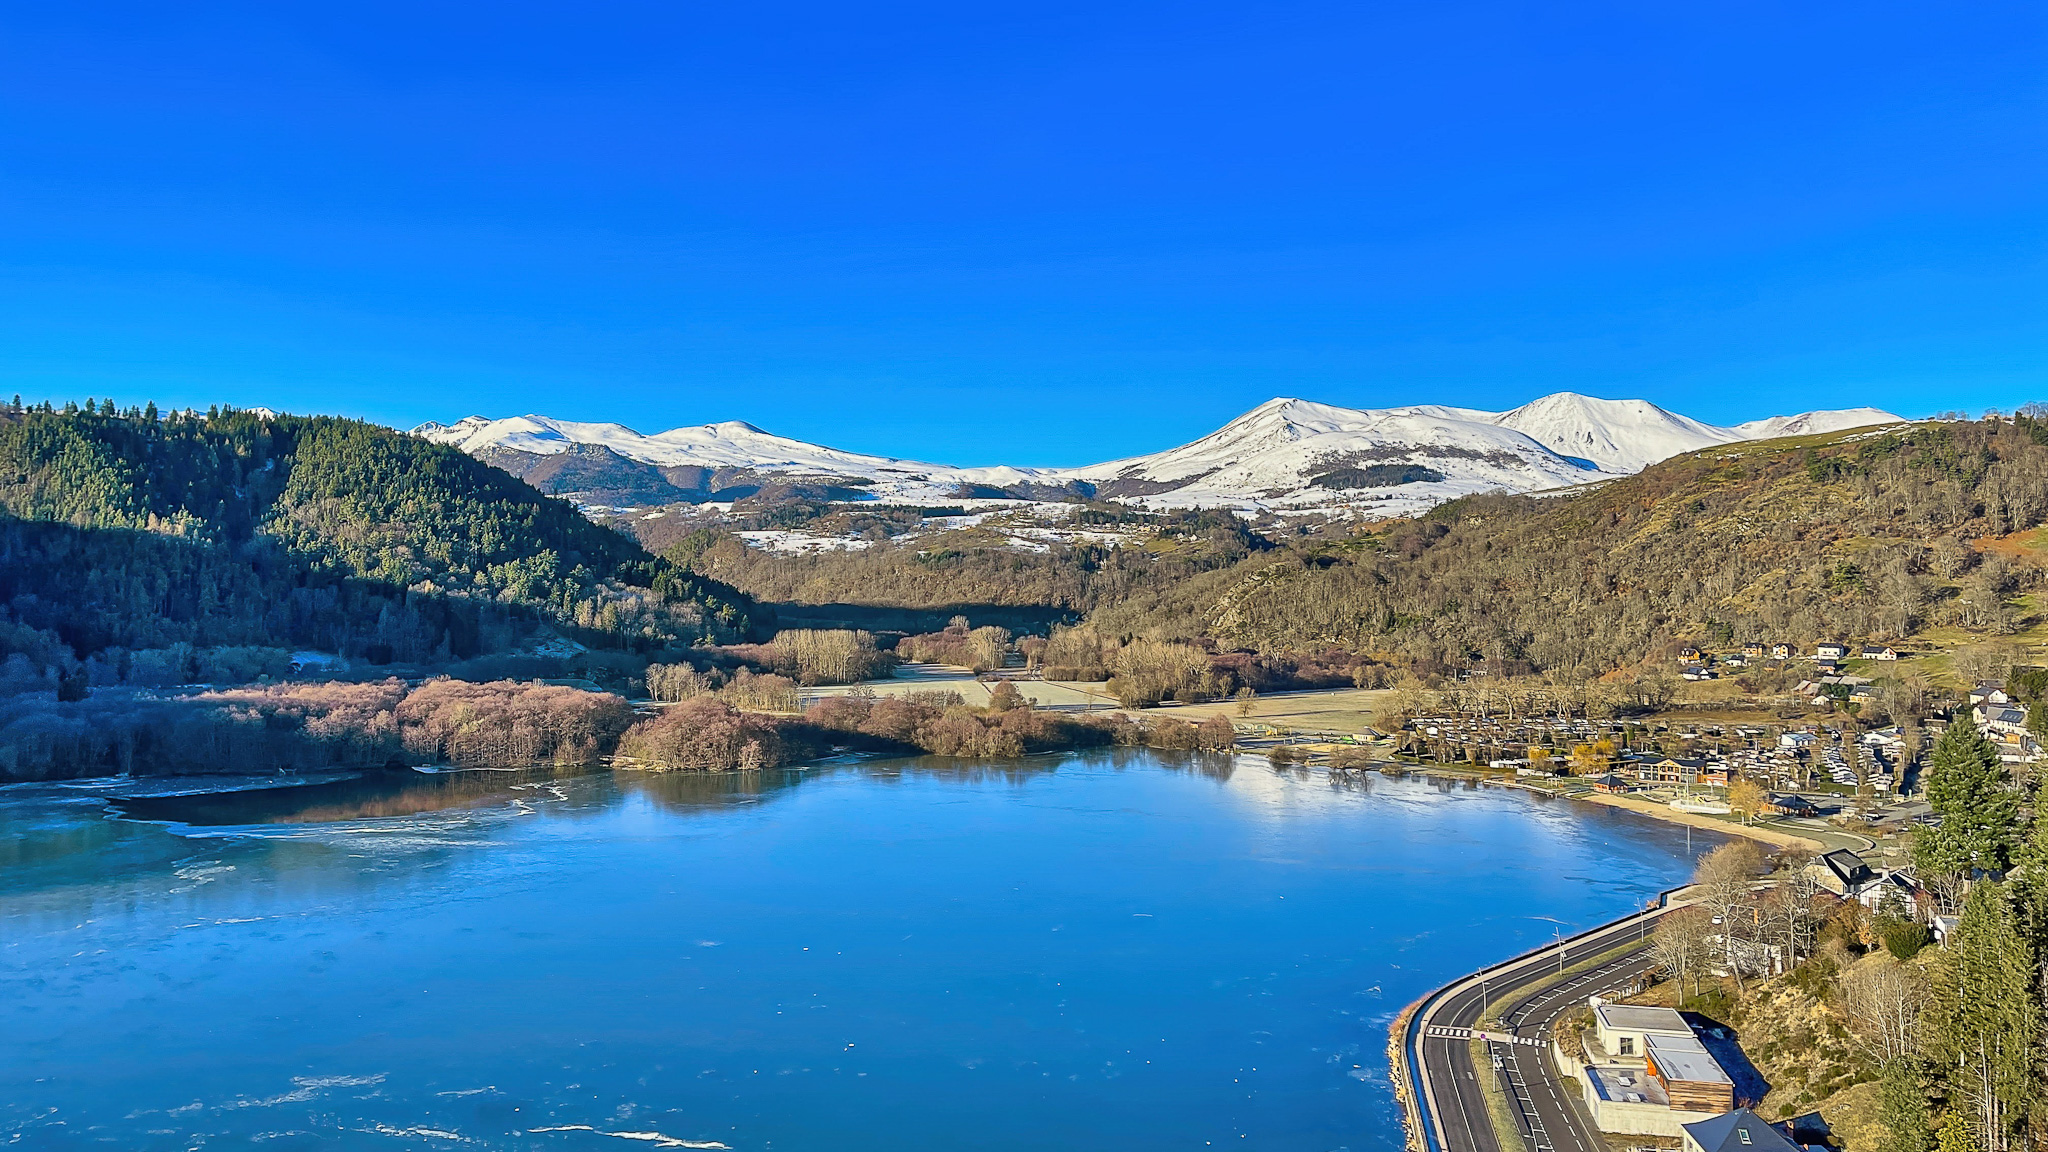 Lac chambon in its winter colors